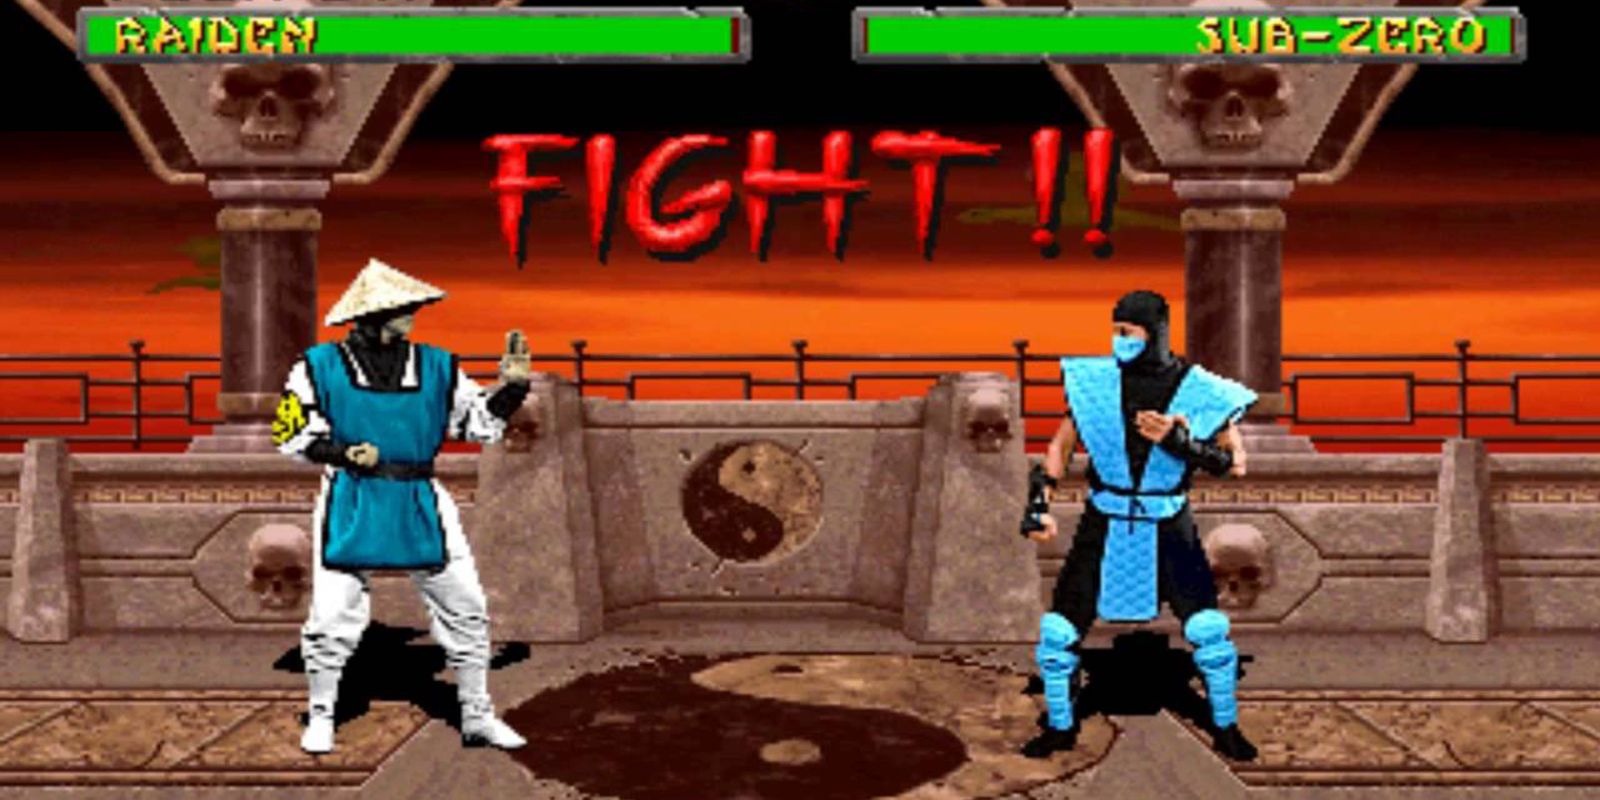 Raiden about to duel with Sub-Zero in Mortal Kombat 2.